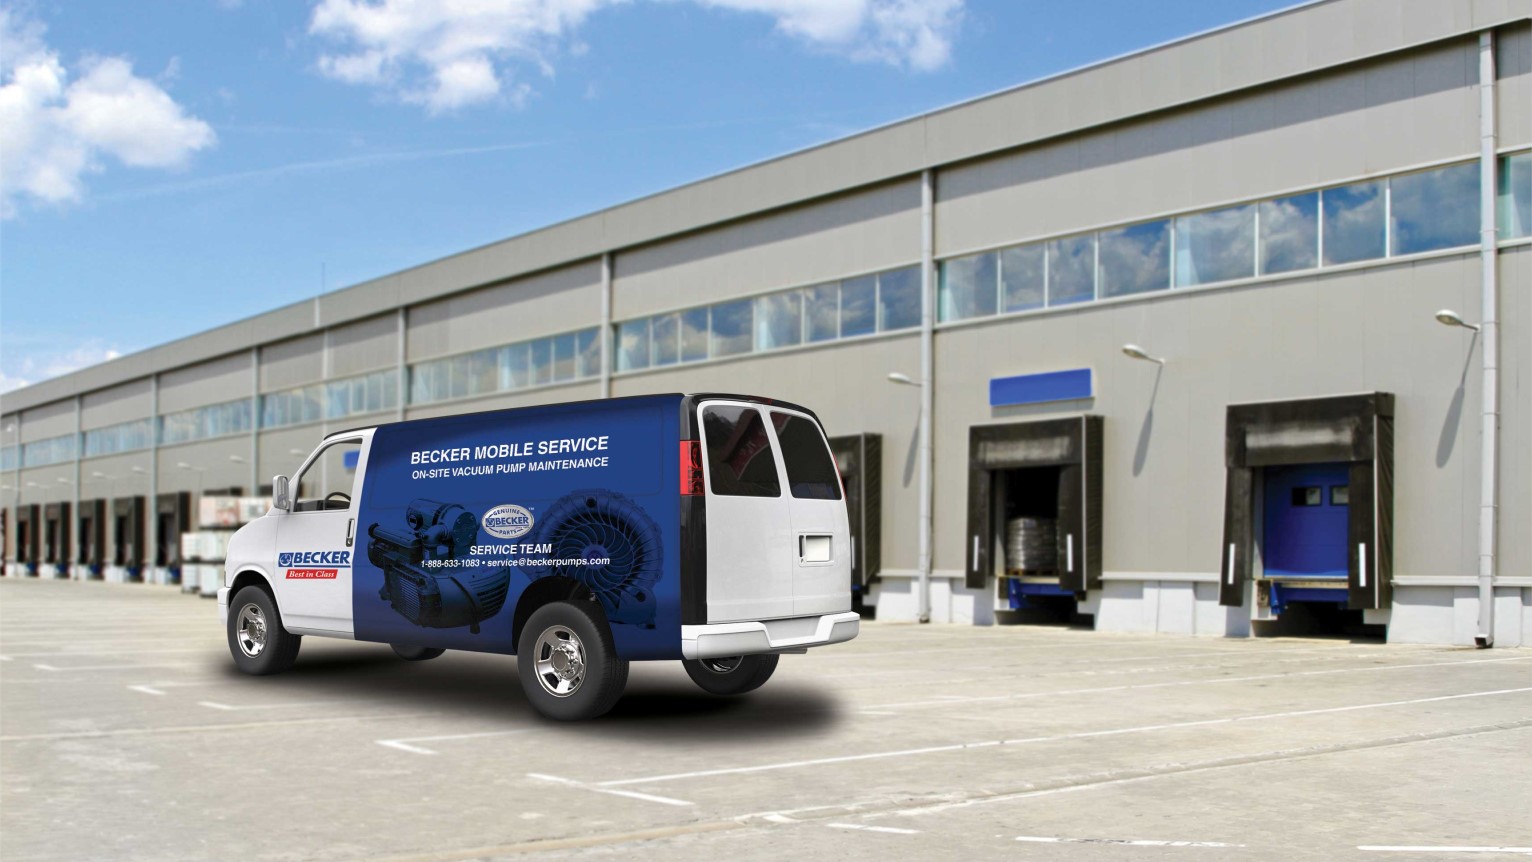 Becker offers mobile service for medical vacuum systems